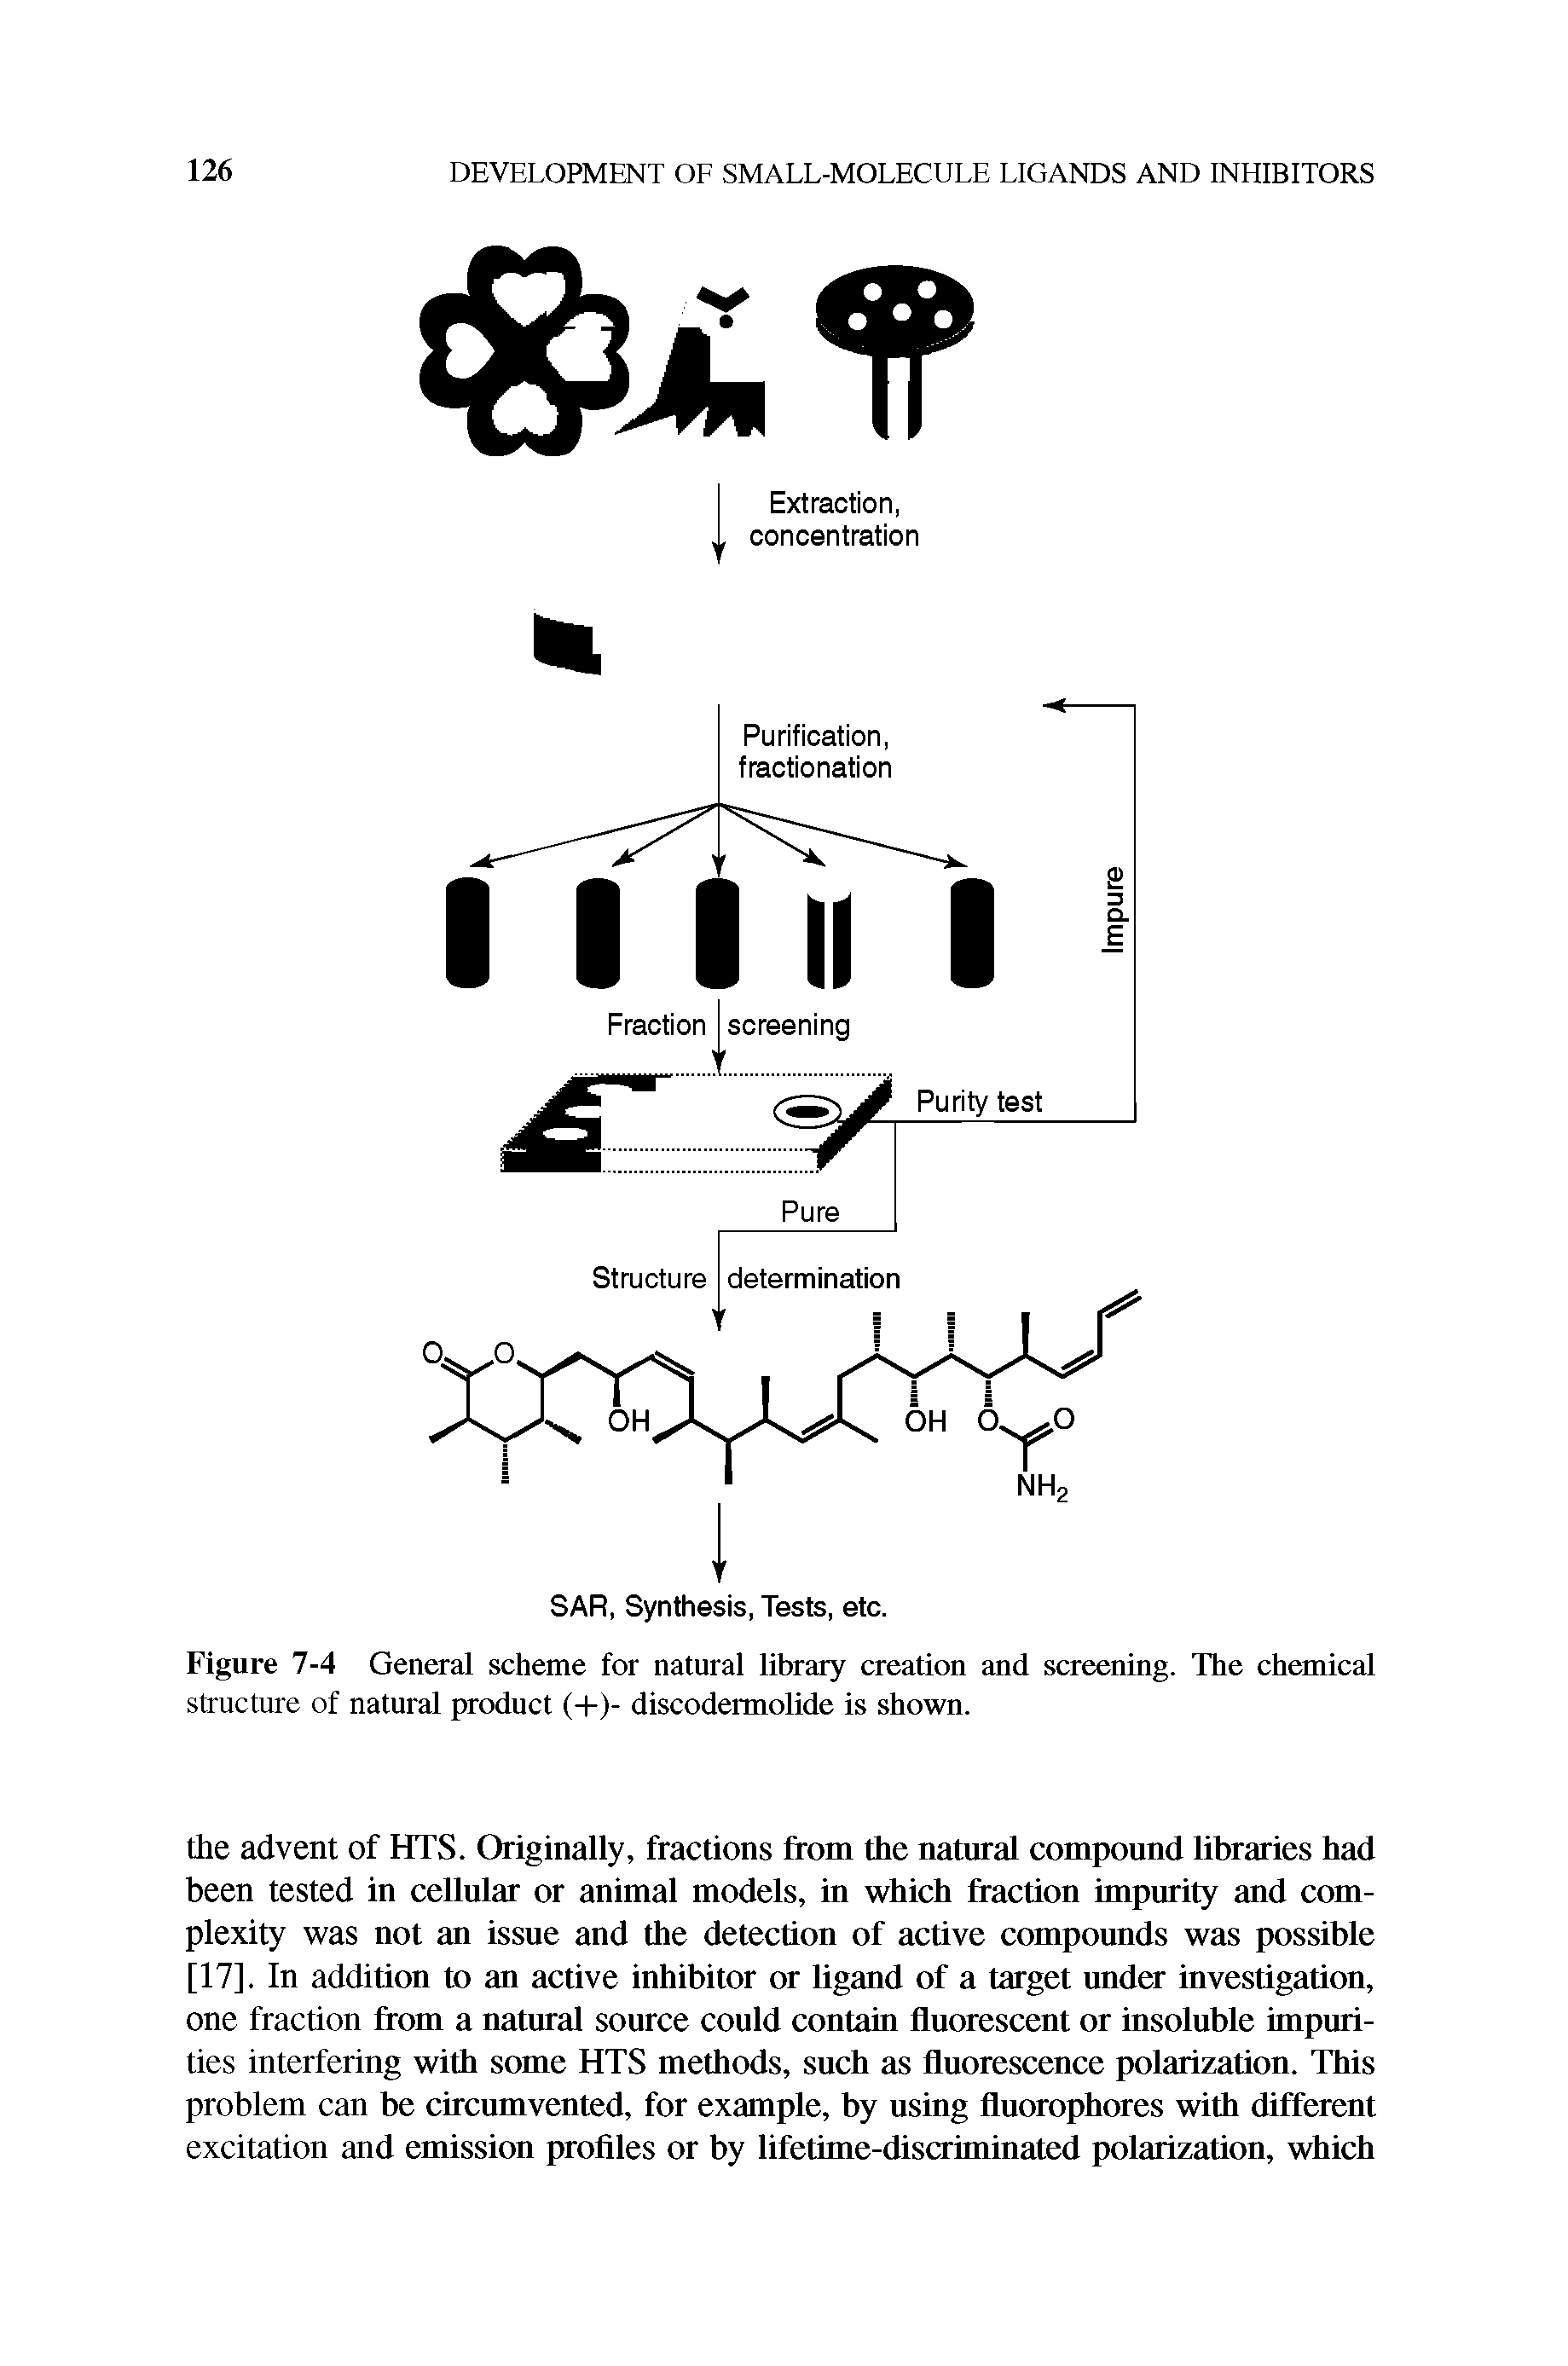 Figure 7-4 General scheme for natural library creation and screening. The chemical structure of natural product (+)- discodermolide is shown.